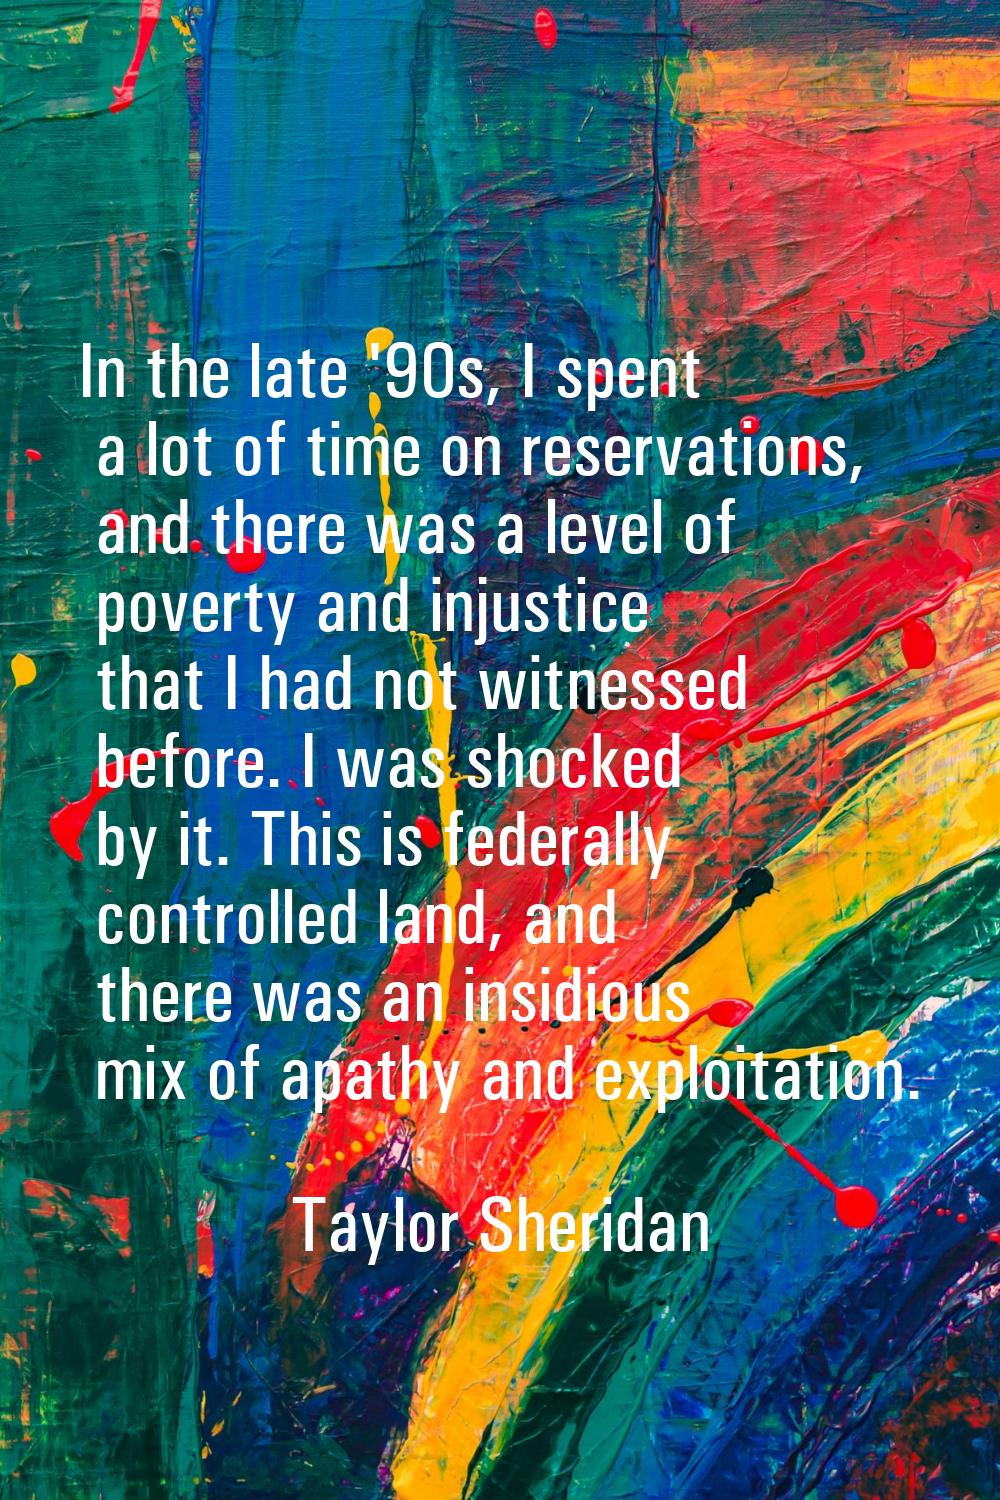 In the late '90s, I spent a lot of time on reservations, and there was a level of poverty and injus